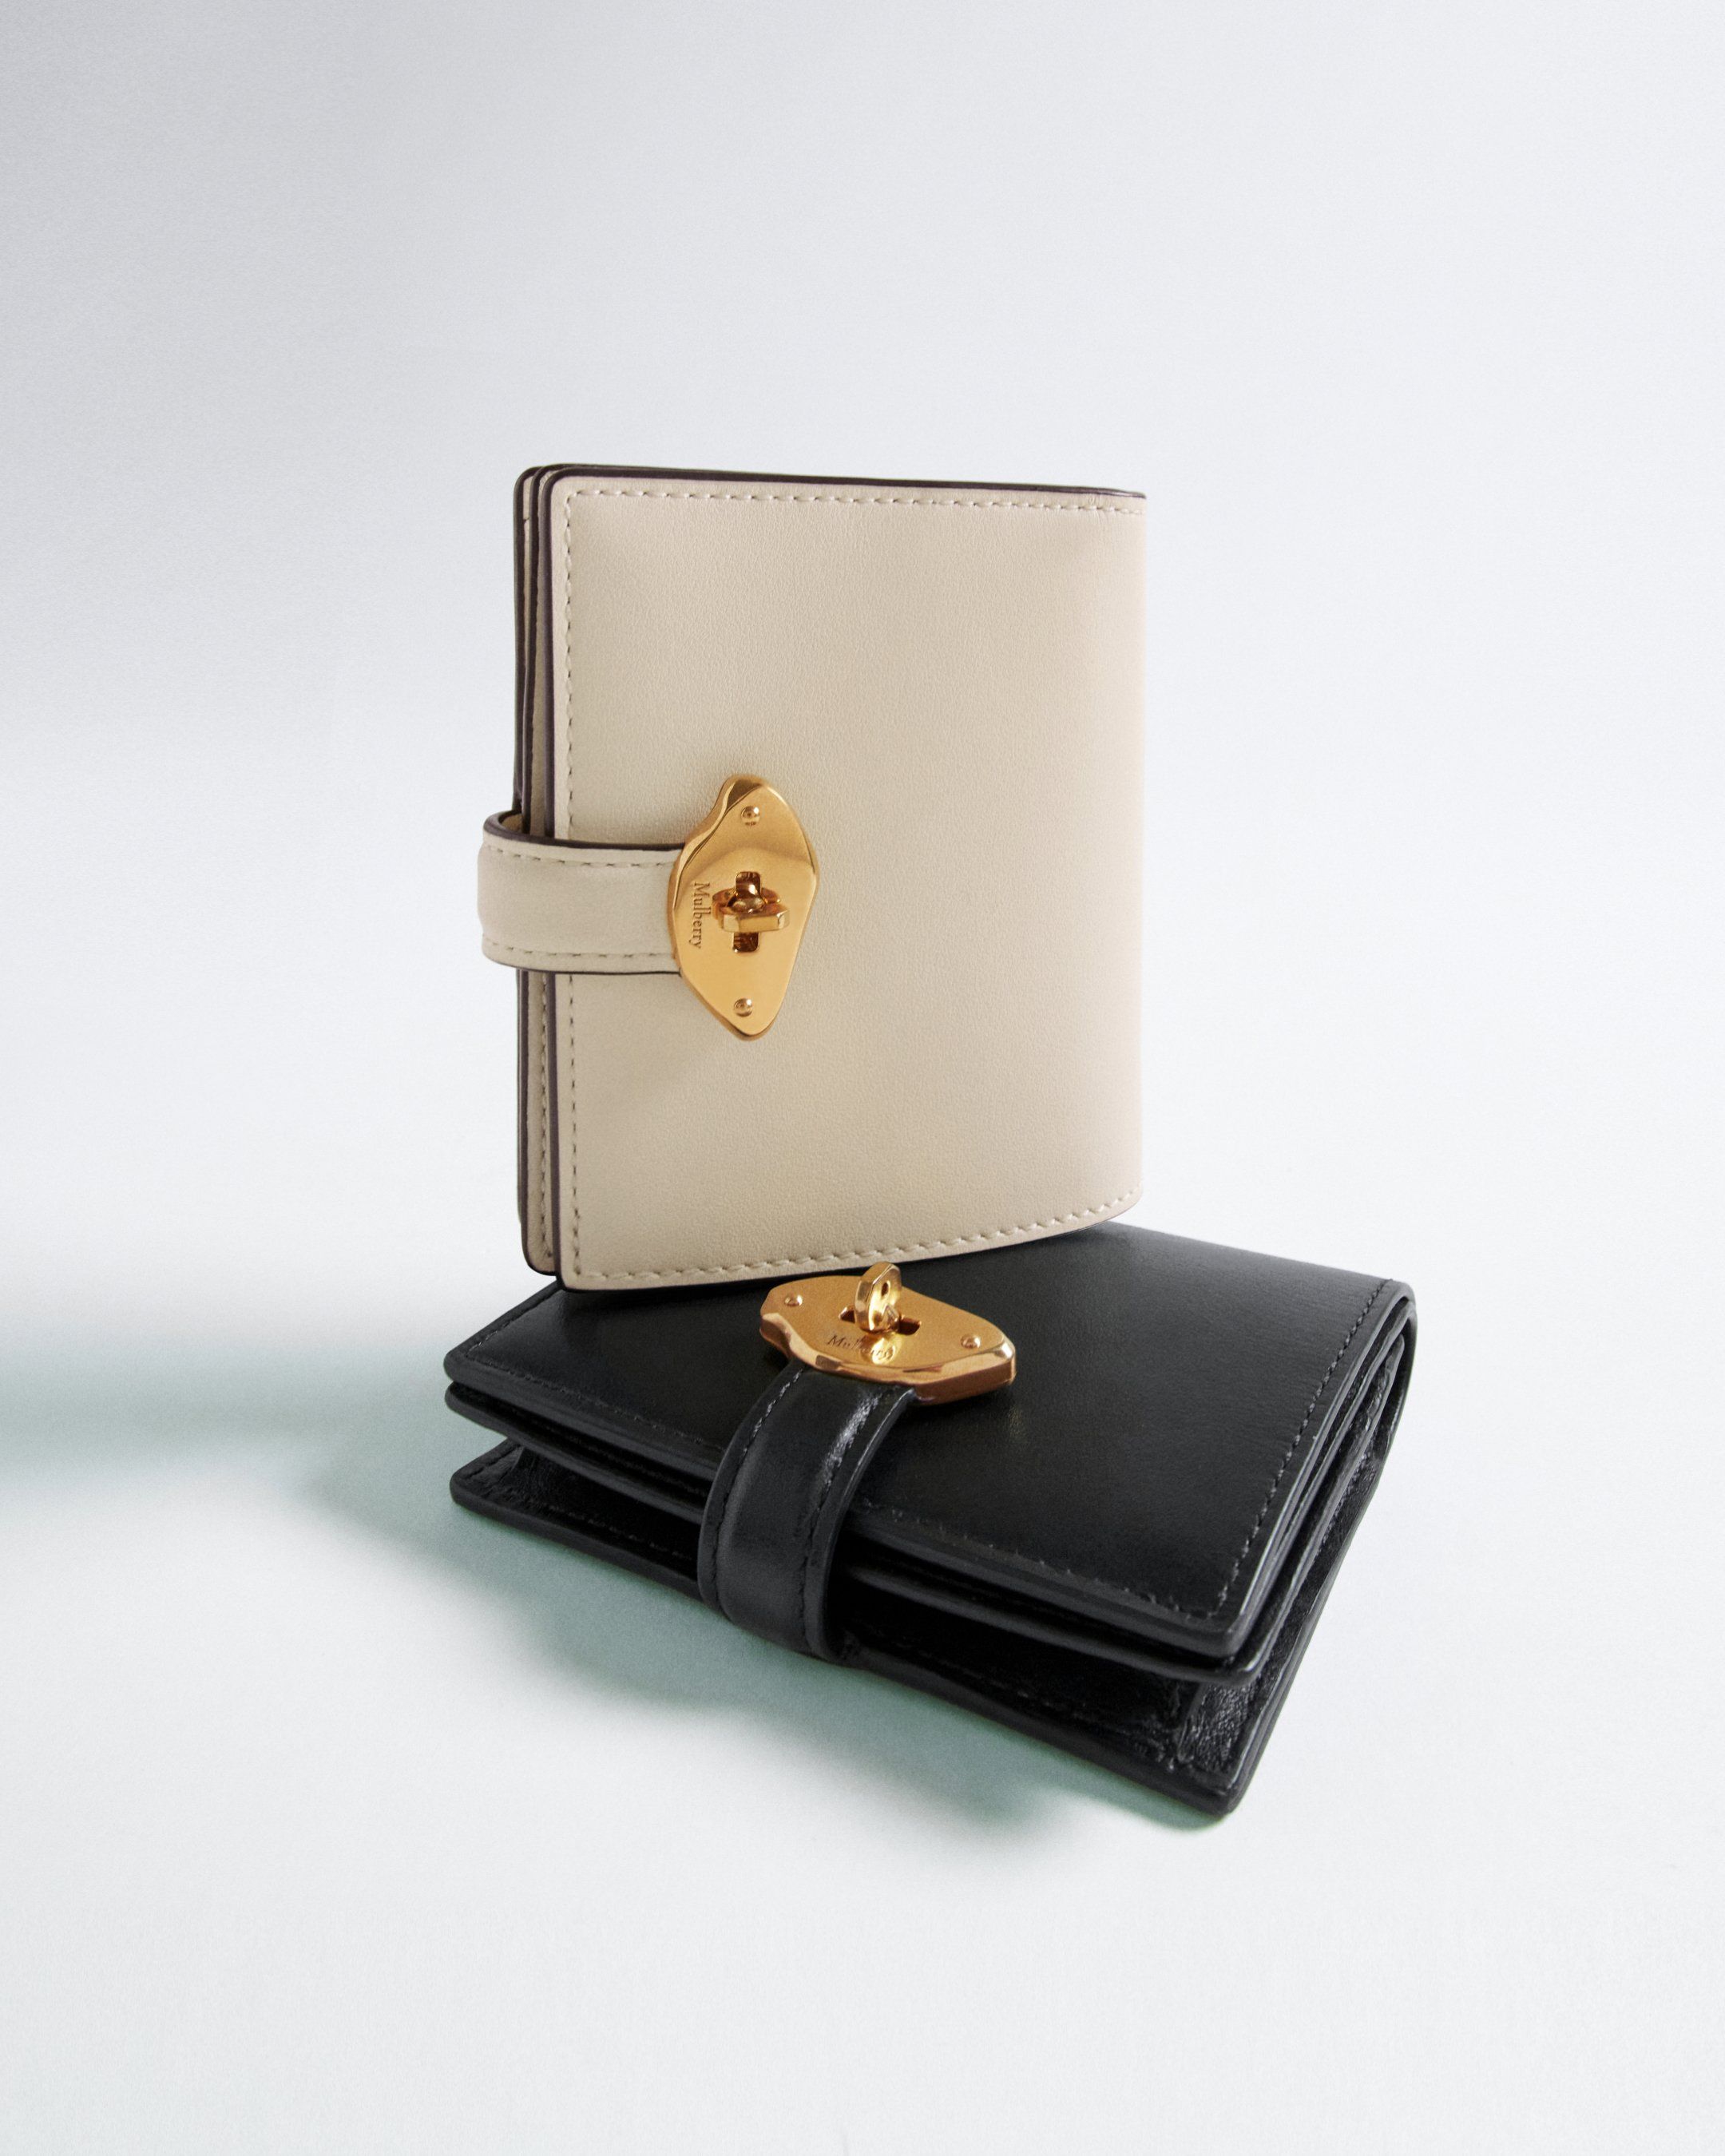 Mulberry Lana compact wallet duo in eggshell and black